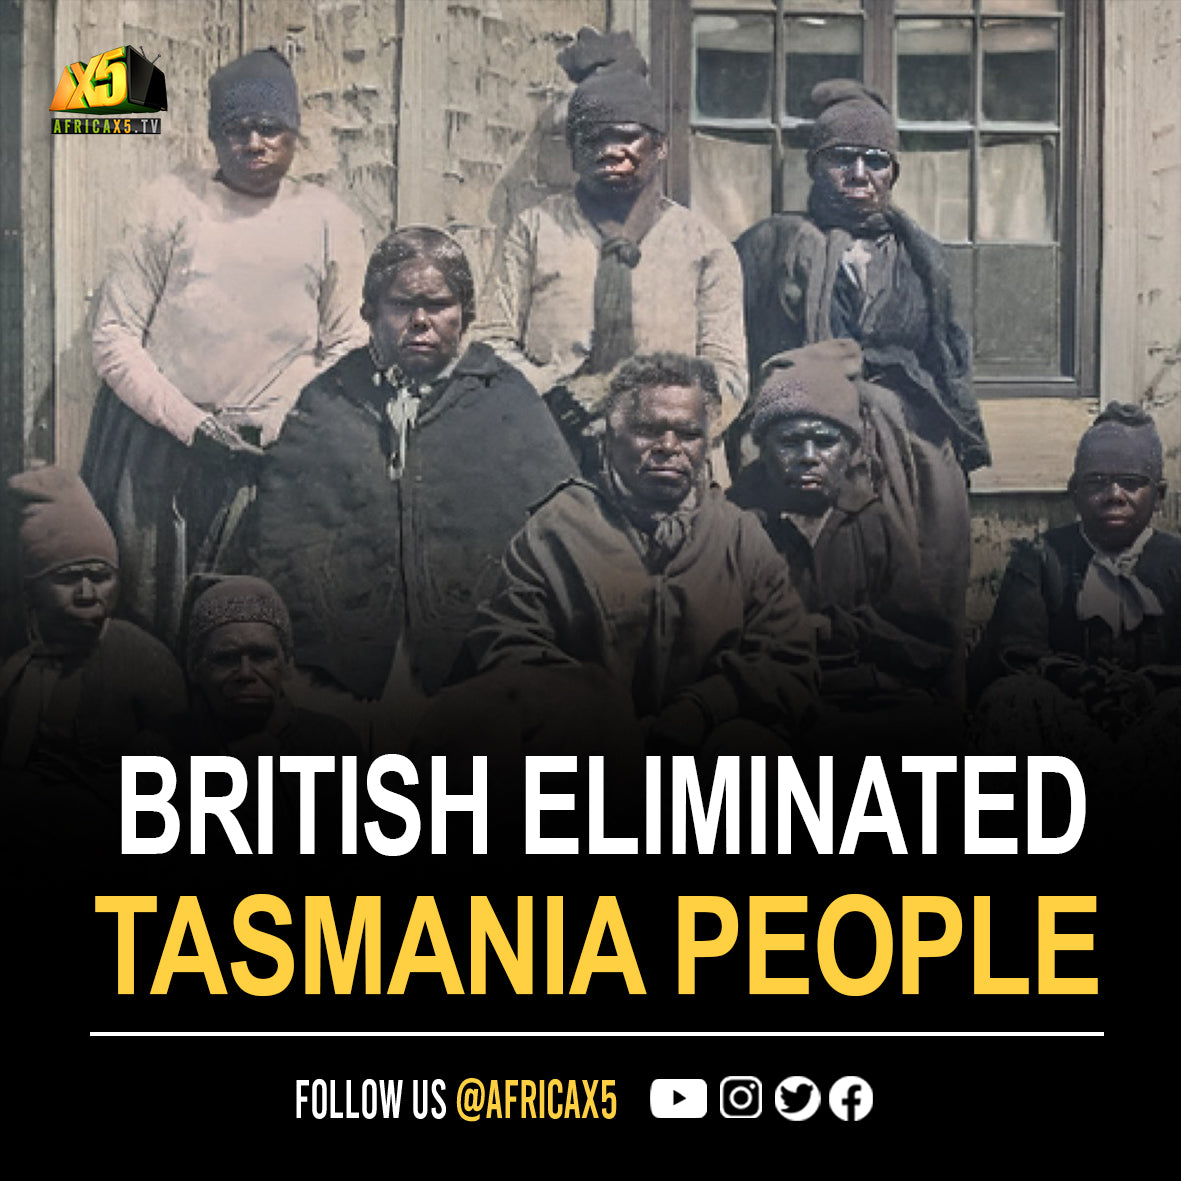 The British almost eliminated the entire Tasmanian Population of Australia in the 1800s by kidnapping, enslaving, torturing and murdering them.